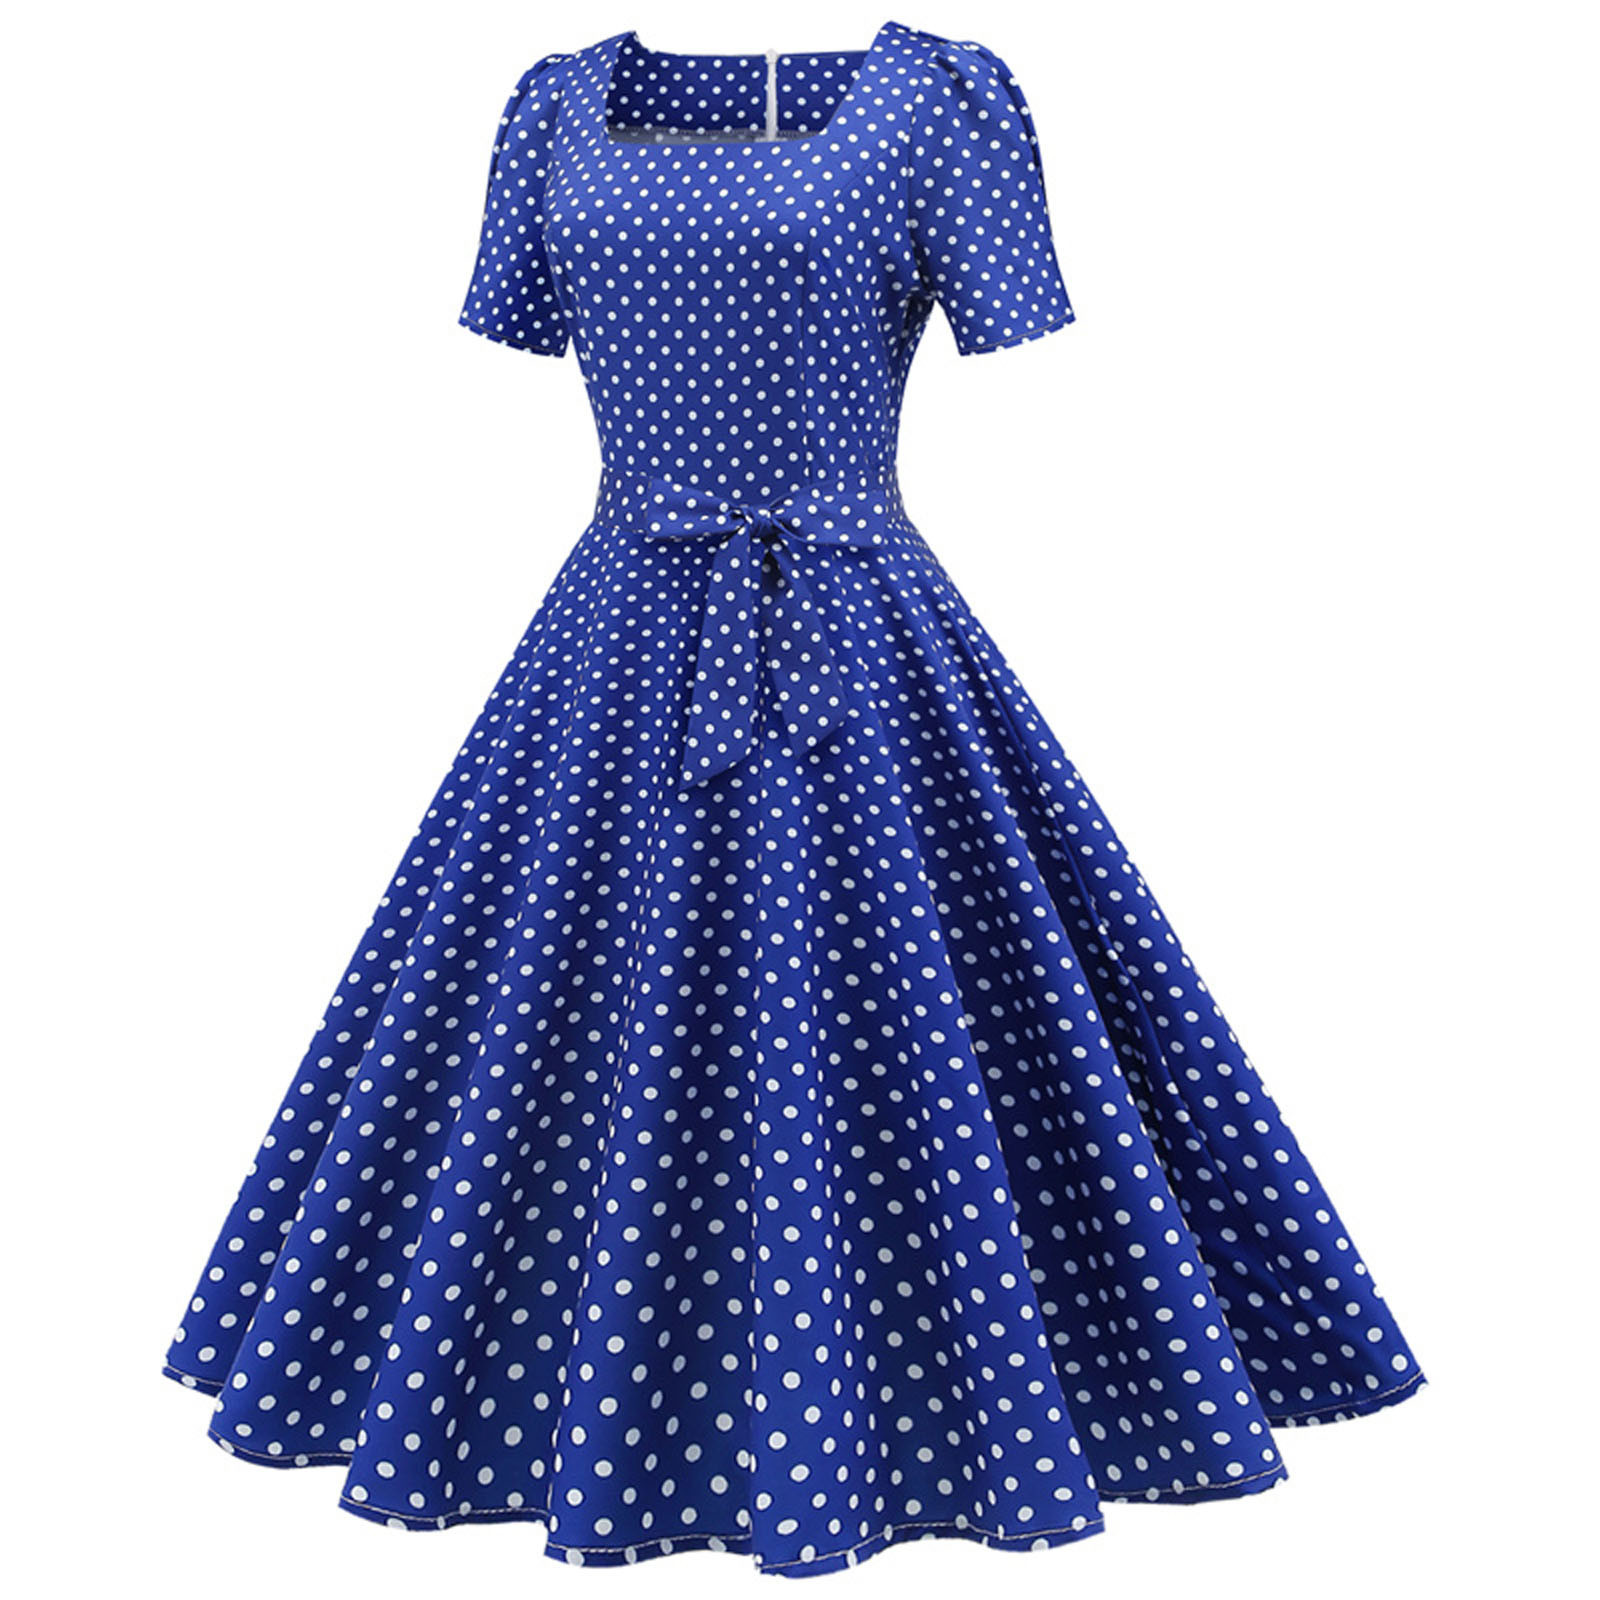 Womens Polka Dot Dress 1950s Vintage Rockabilly Flowy Dresses Short Sleeve Cocktail Prom Party Dress for Women 2023 - image 2 of 4